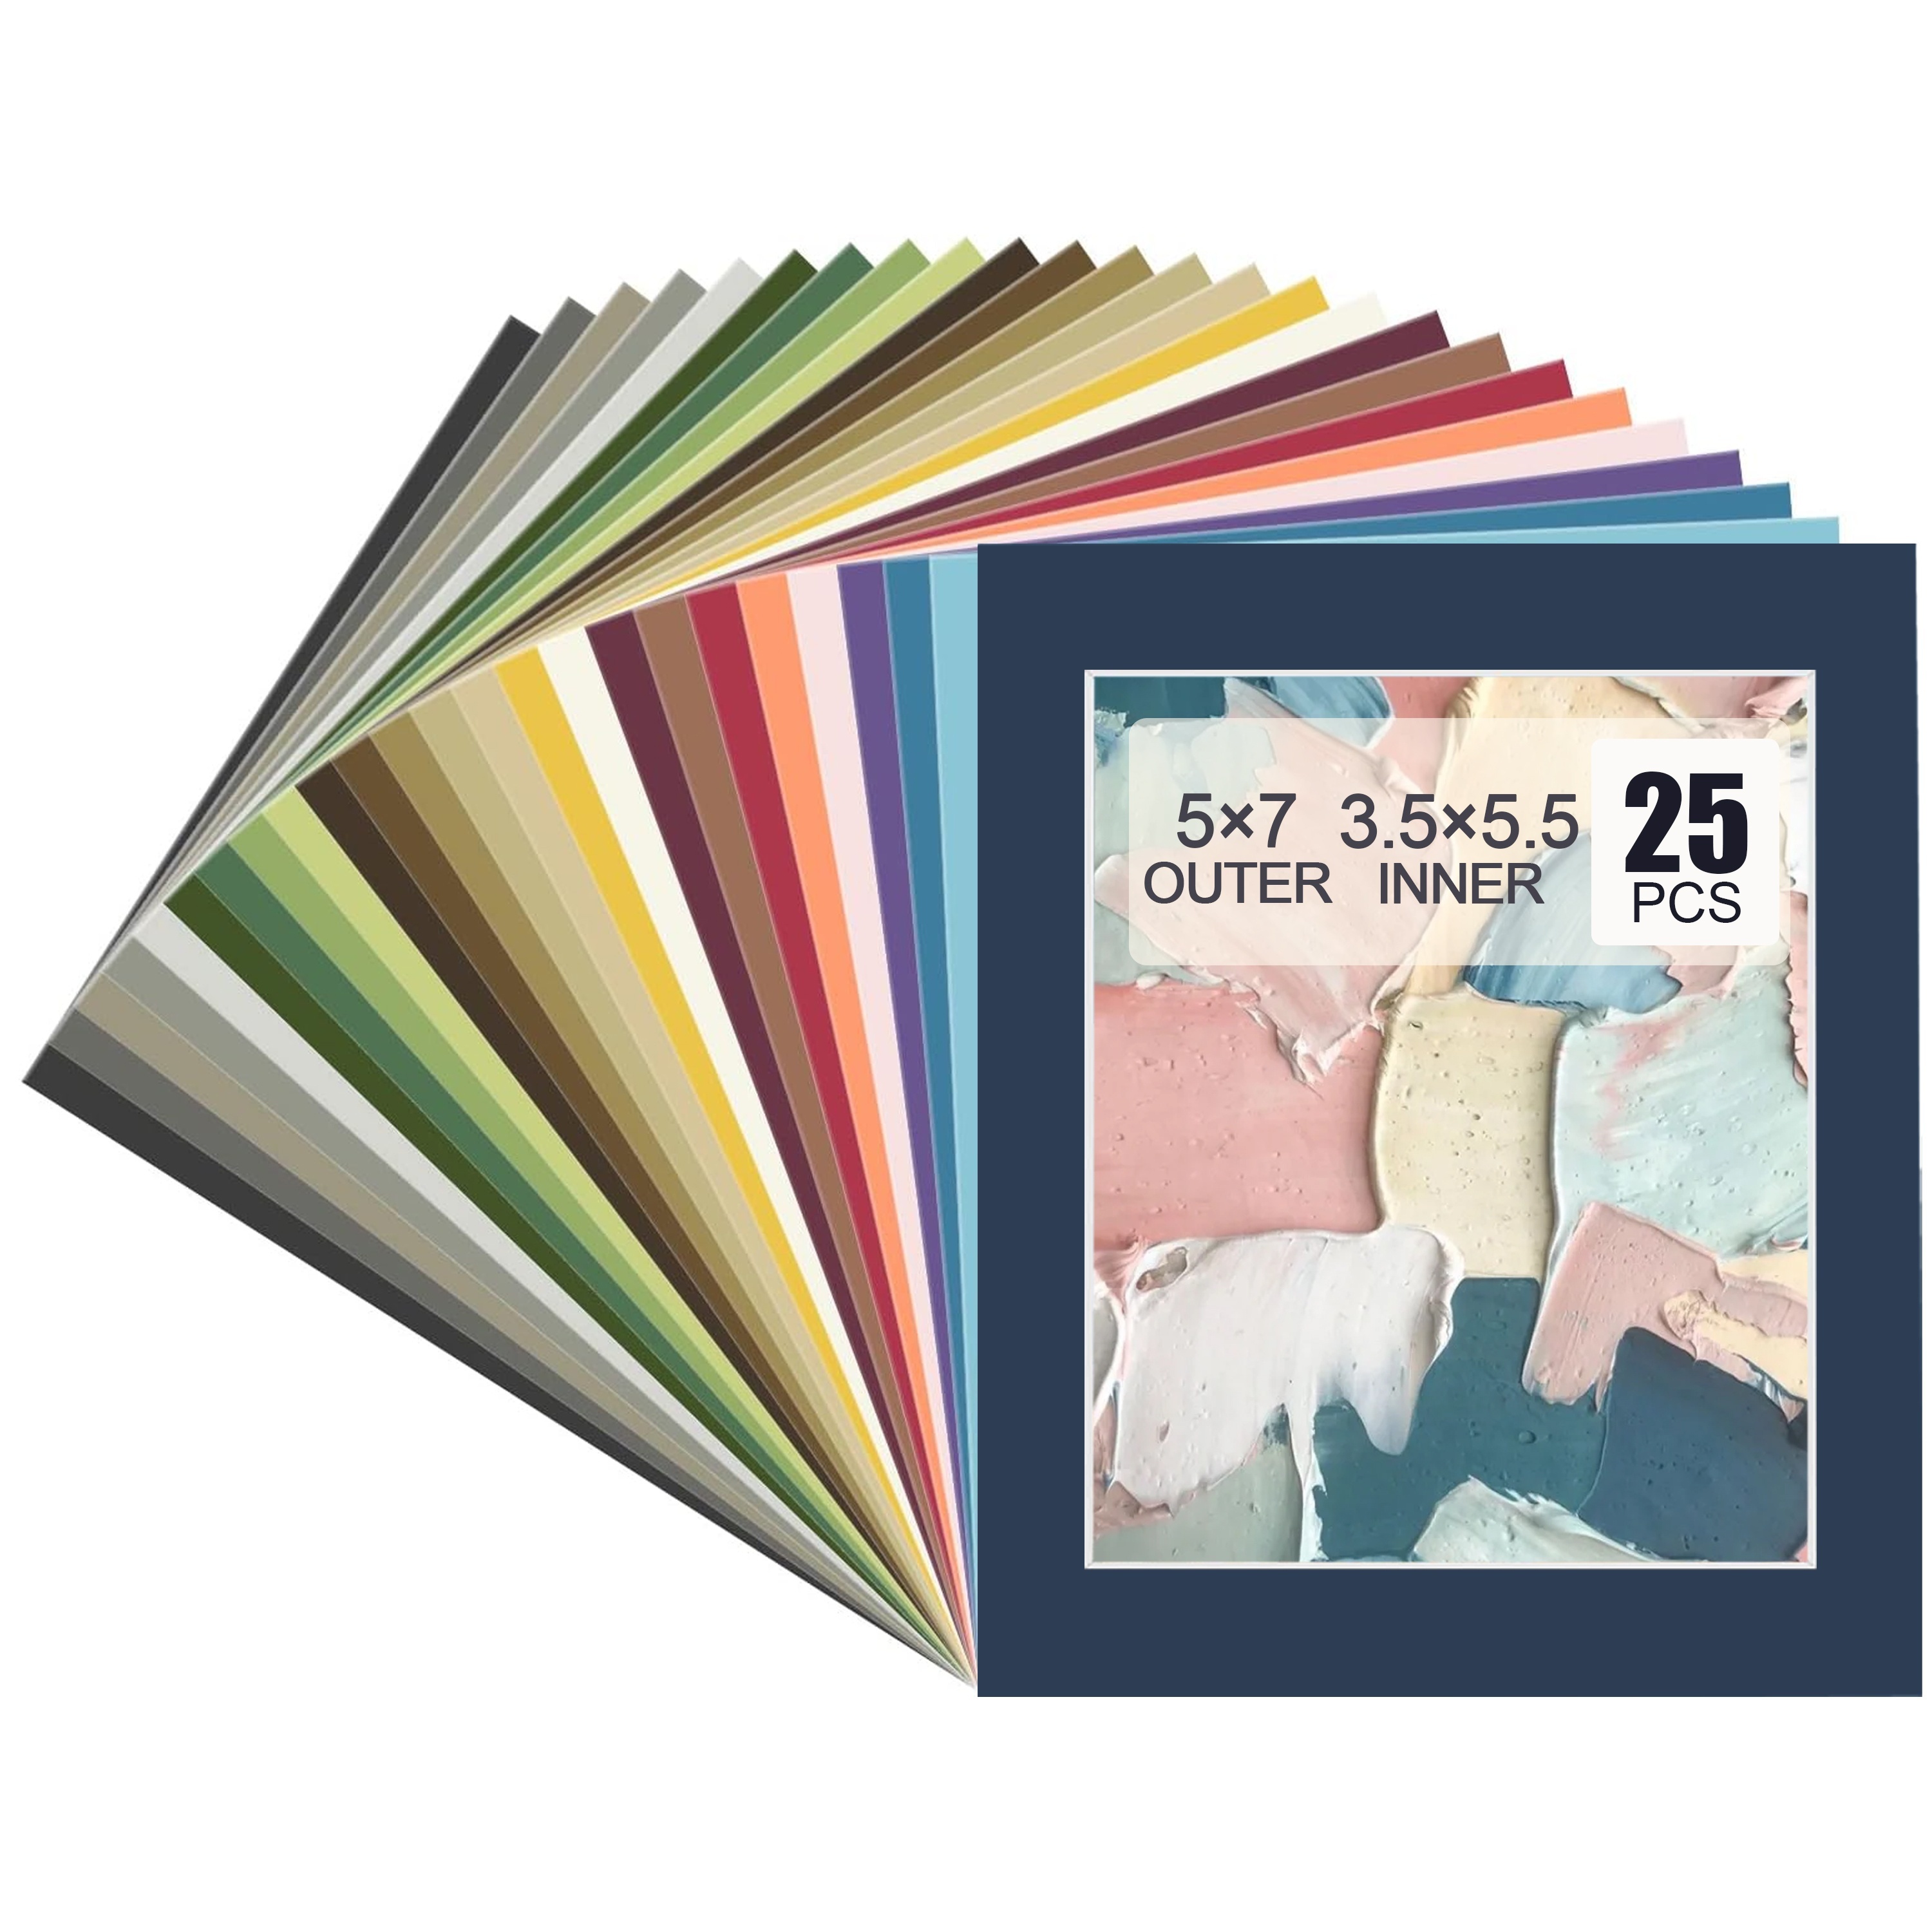 

25 Pcs Mixed Colors Picture Mats: 5x7 Inch Photo Frames With White Core Bevel Cut, Acid Free, Perfect For Photos, Art, And Room Decor